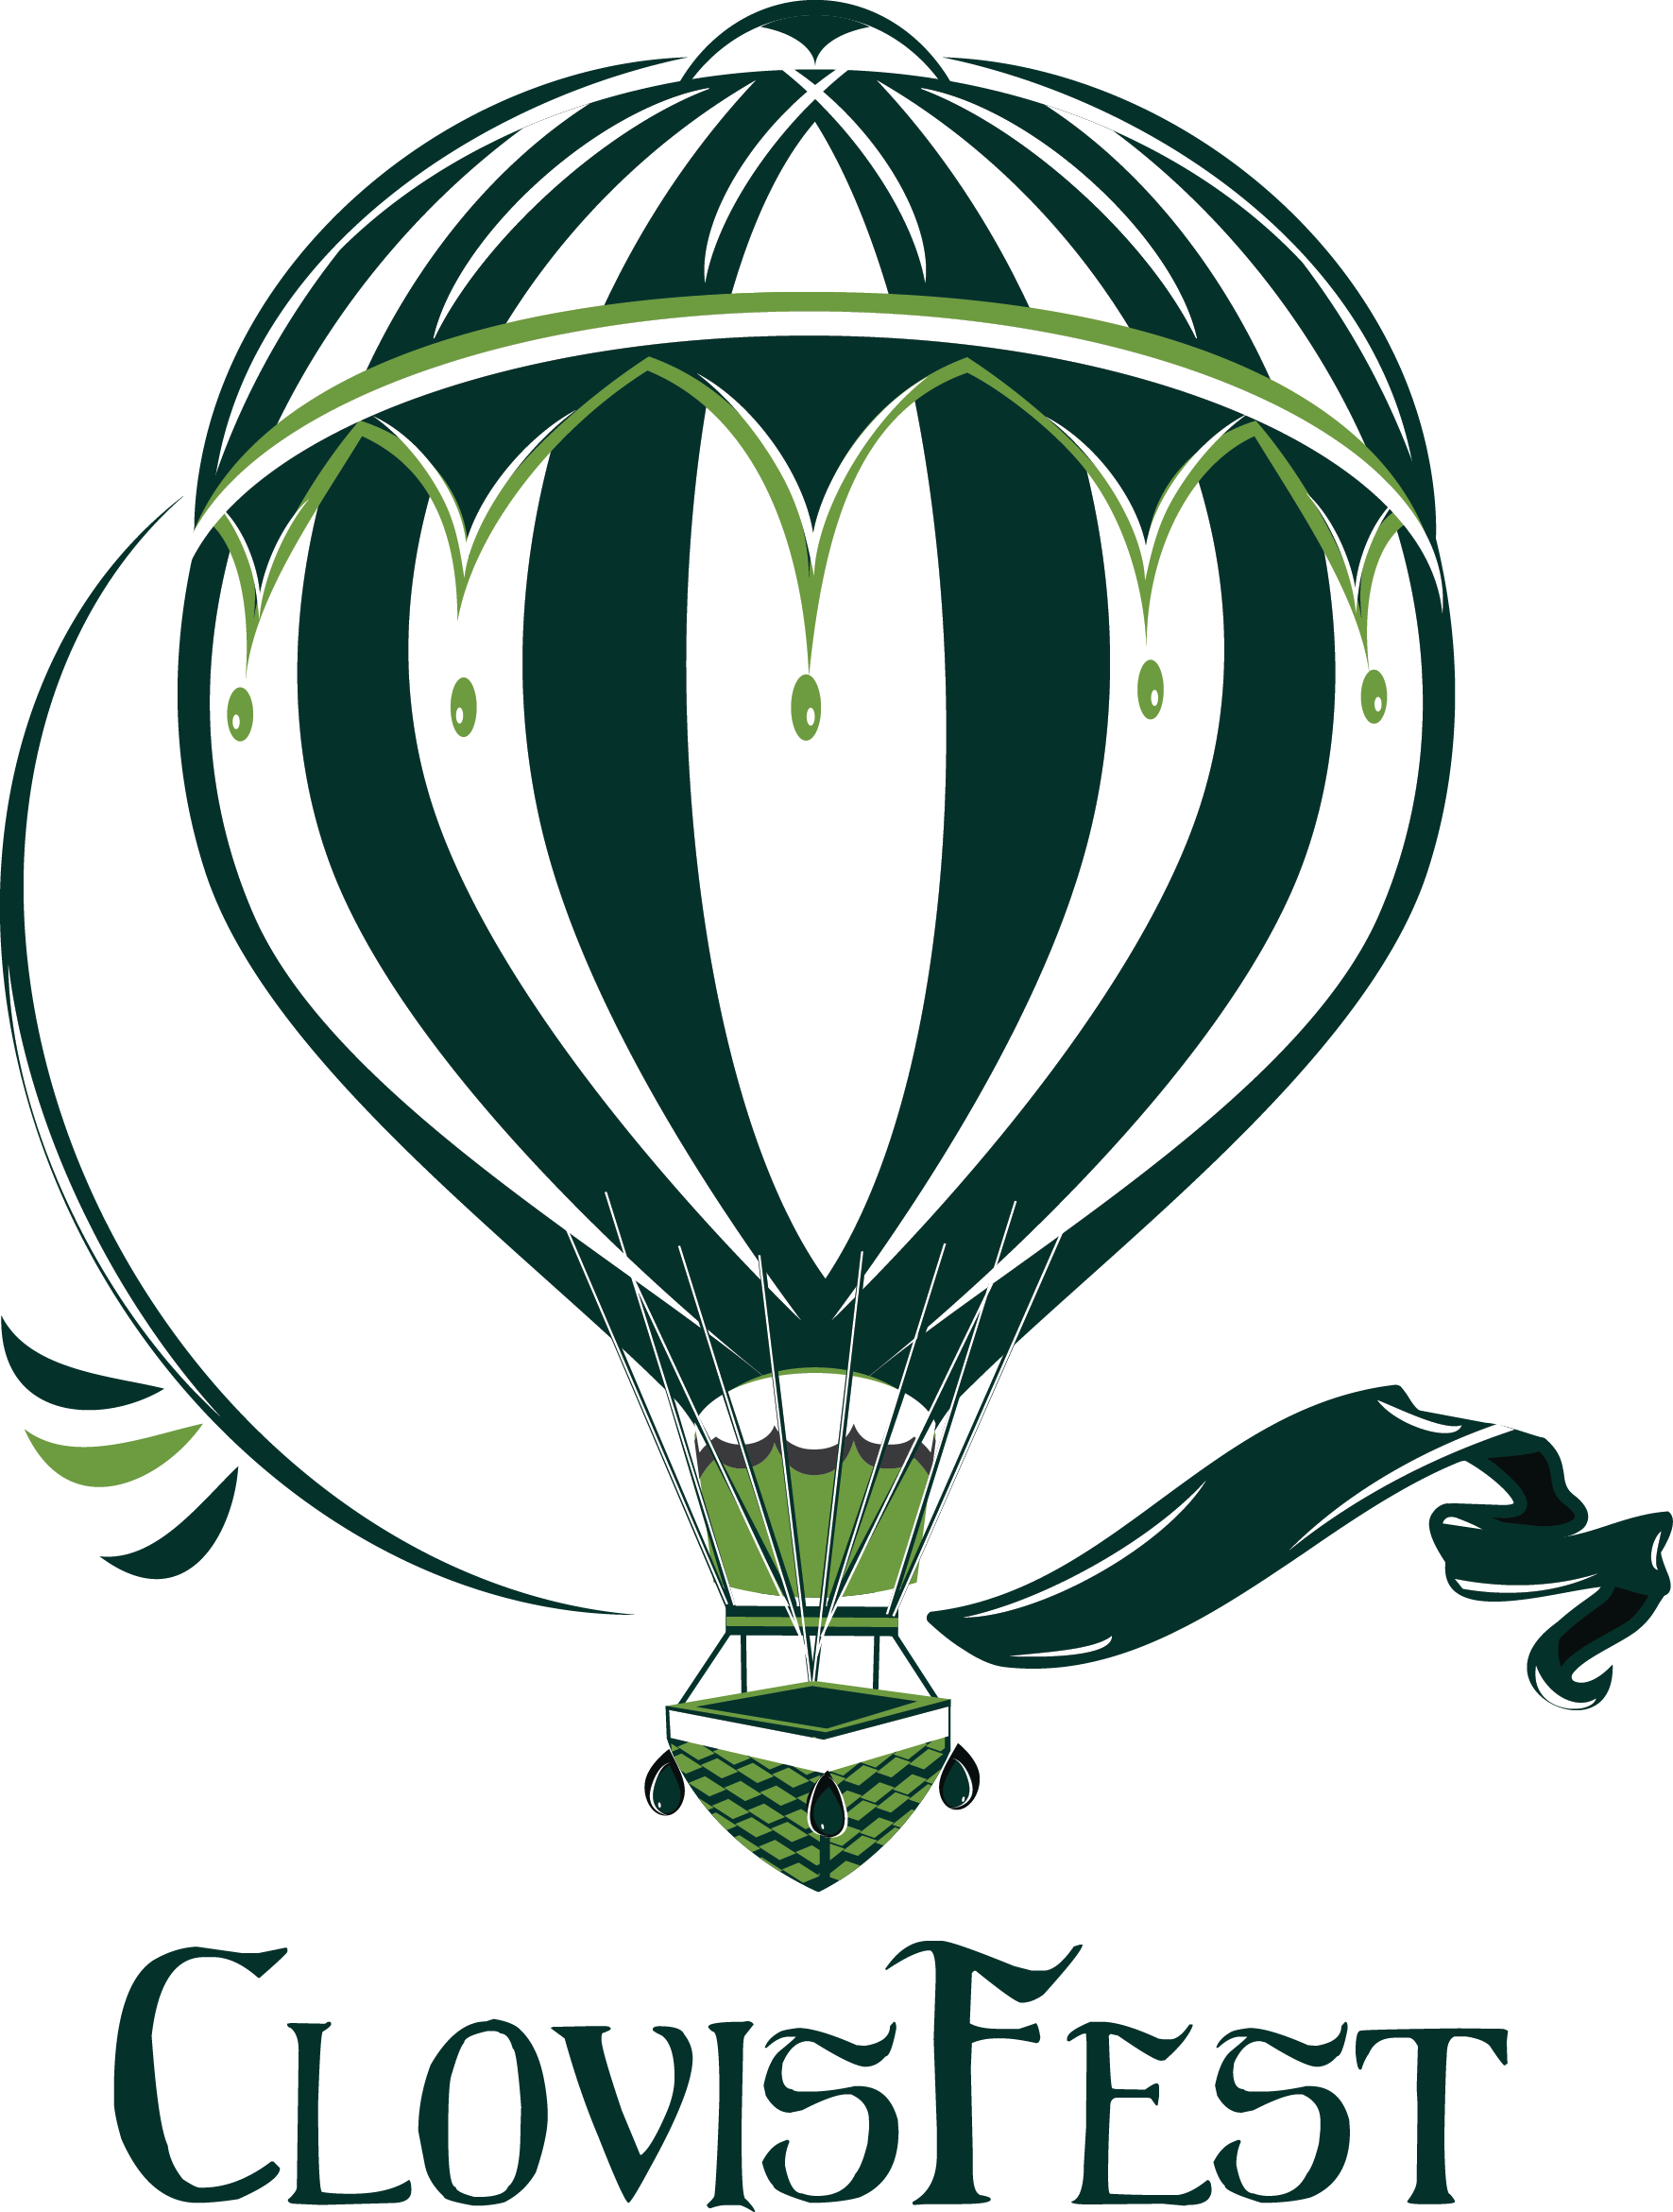 Shows illustration of hot air balloon with "ClovisFest" name beneath.